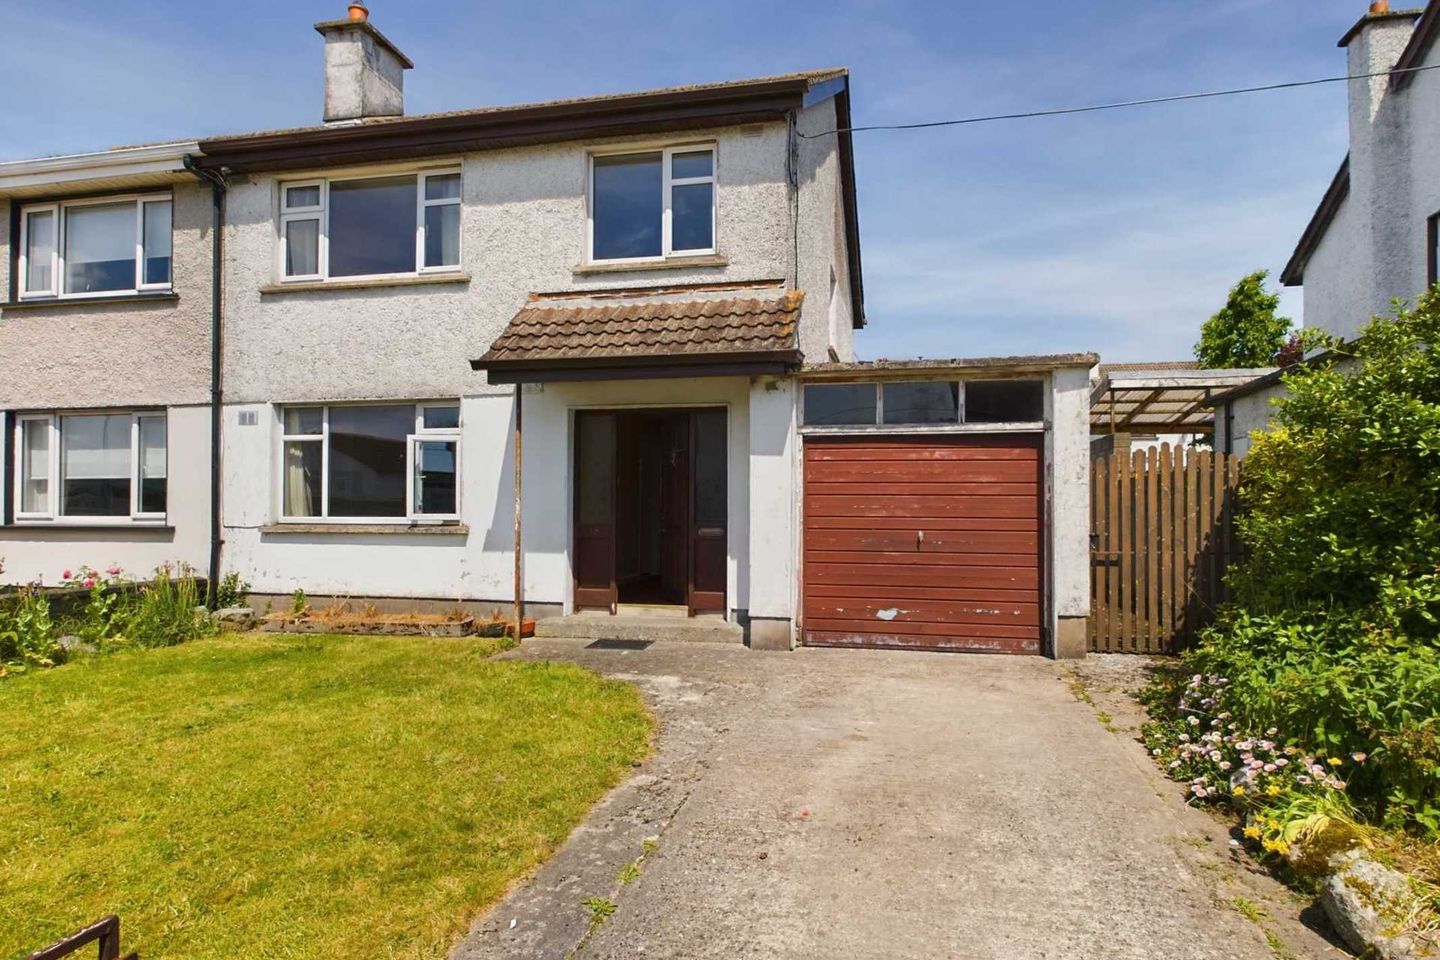 18 Ashgrove, Tullow Road, Carlow Town, Co. Carlow